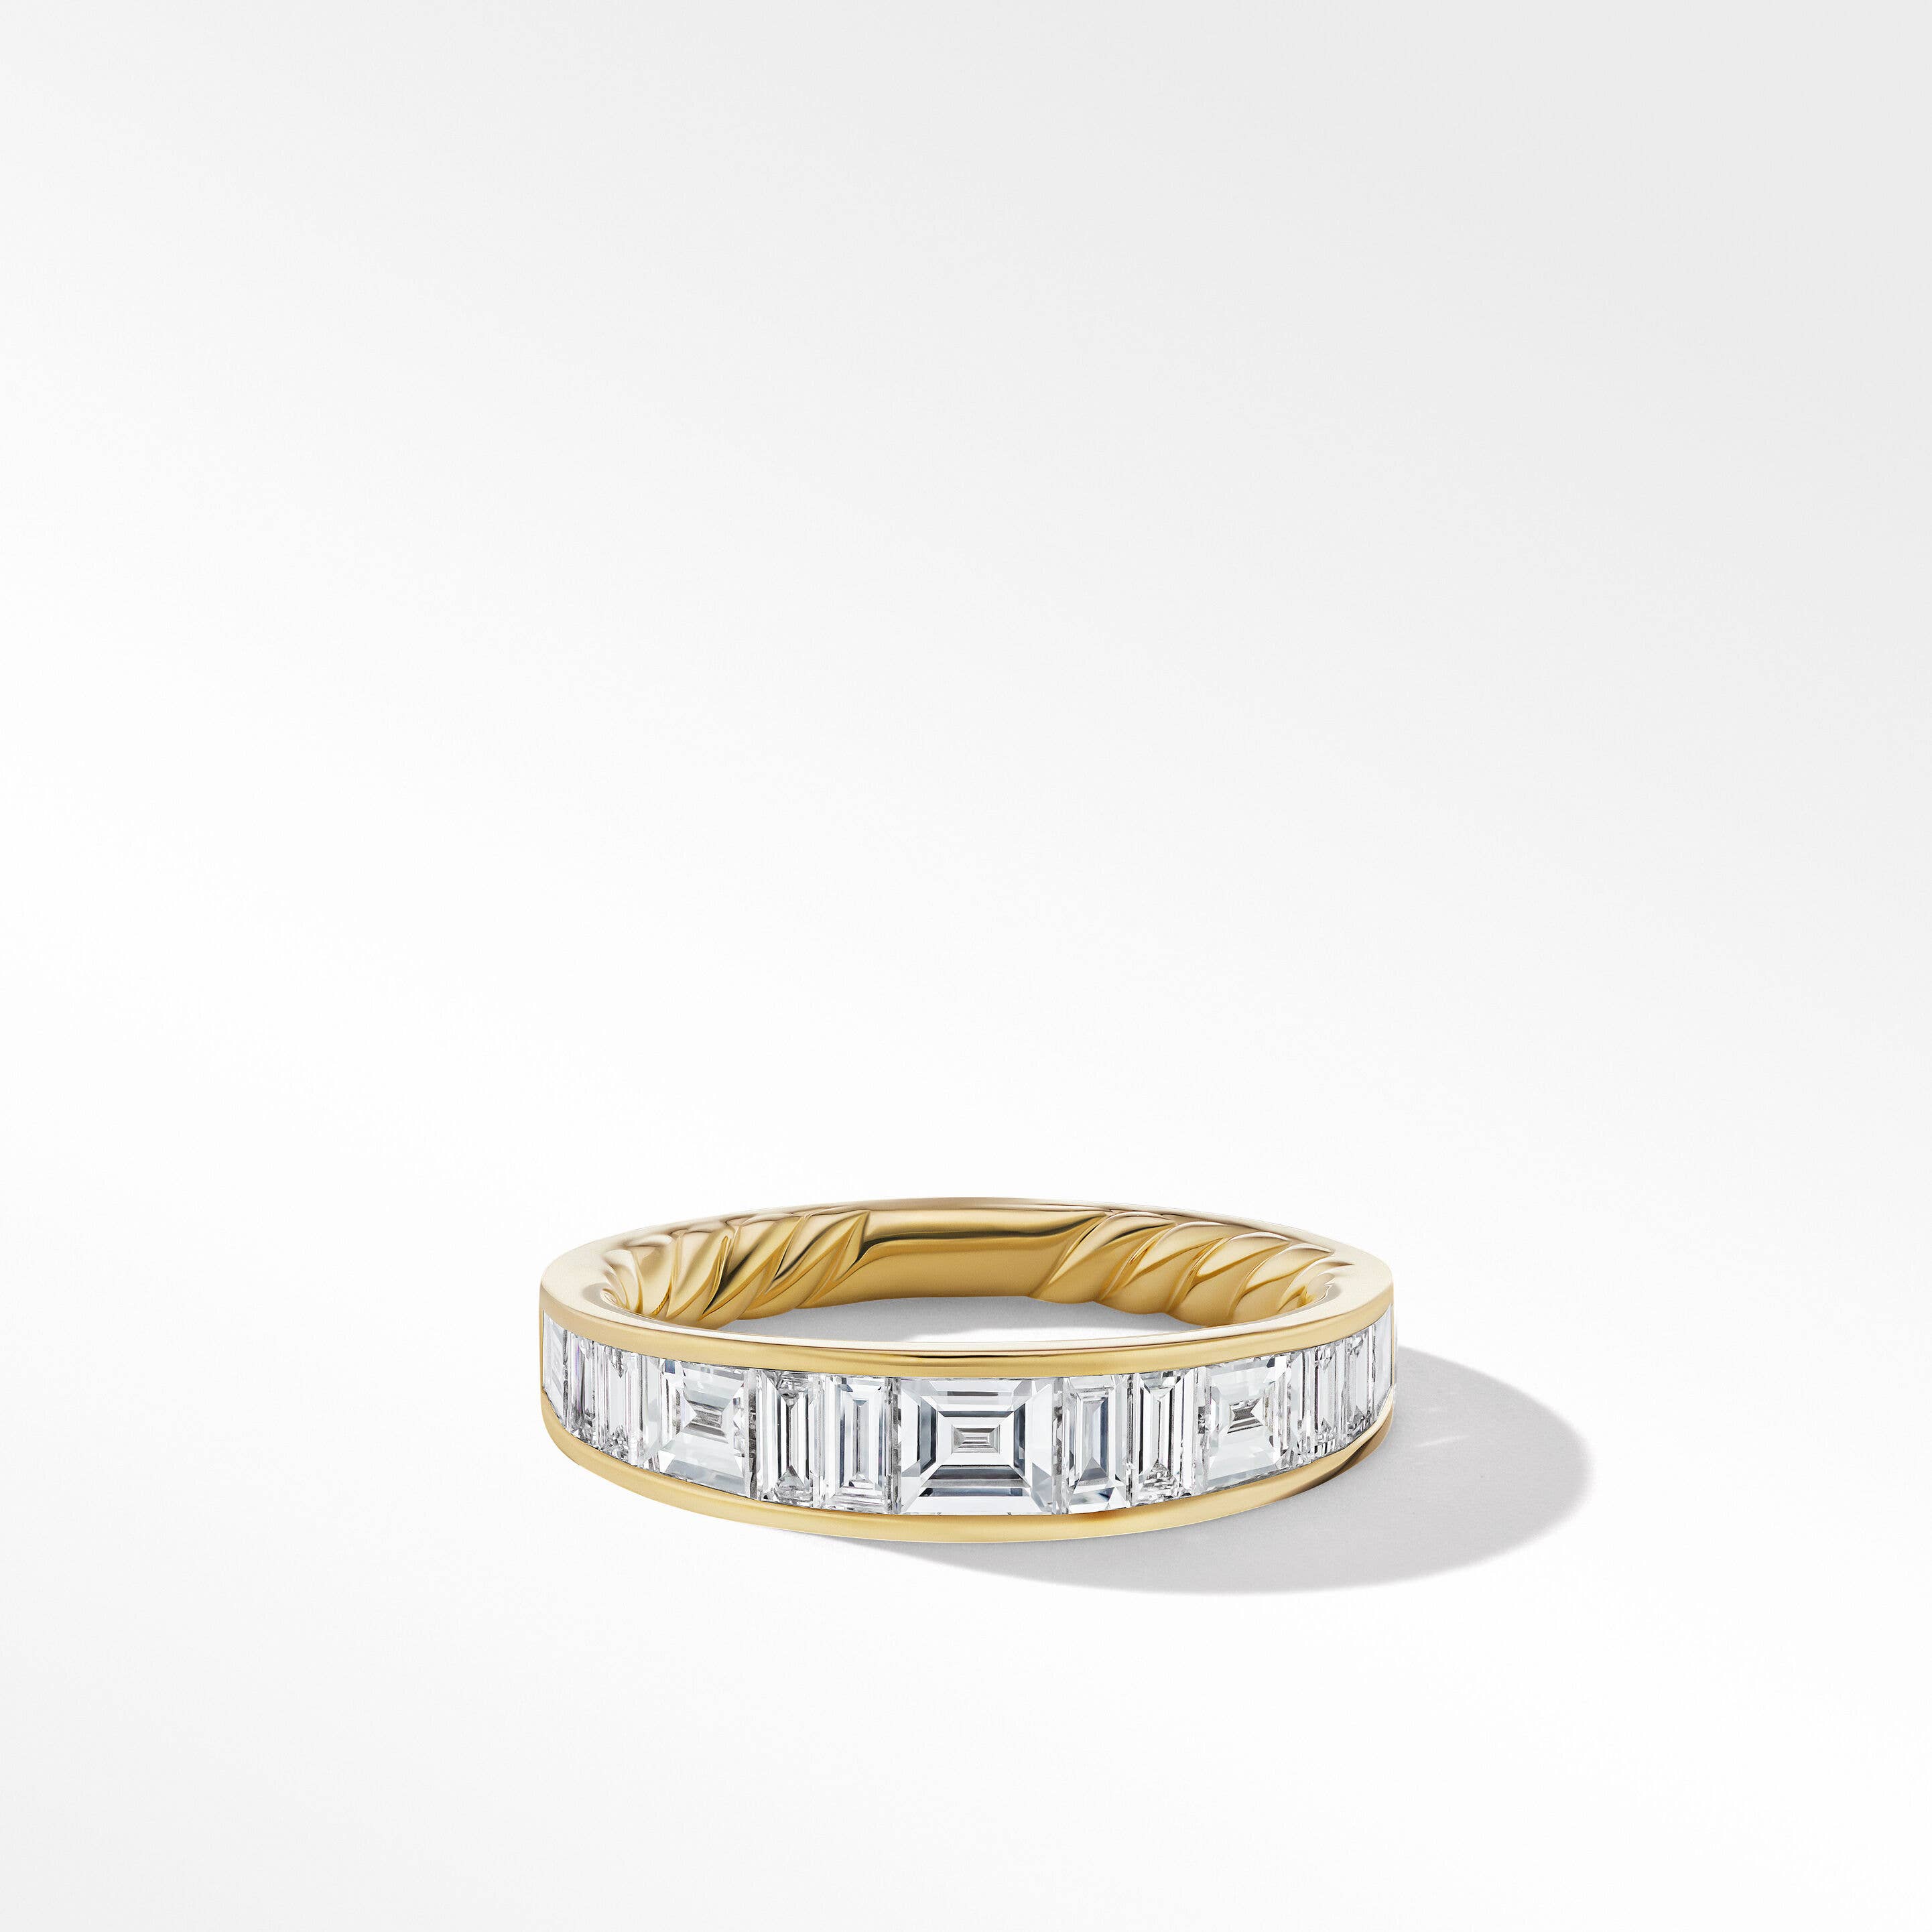 DY Eden Band Ring in 18K Yellow Gold with Diamonds